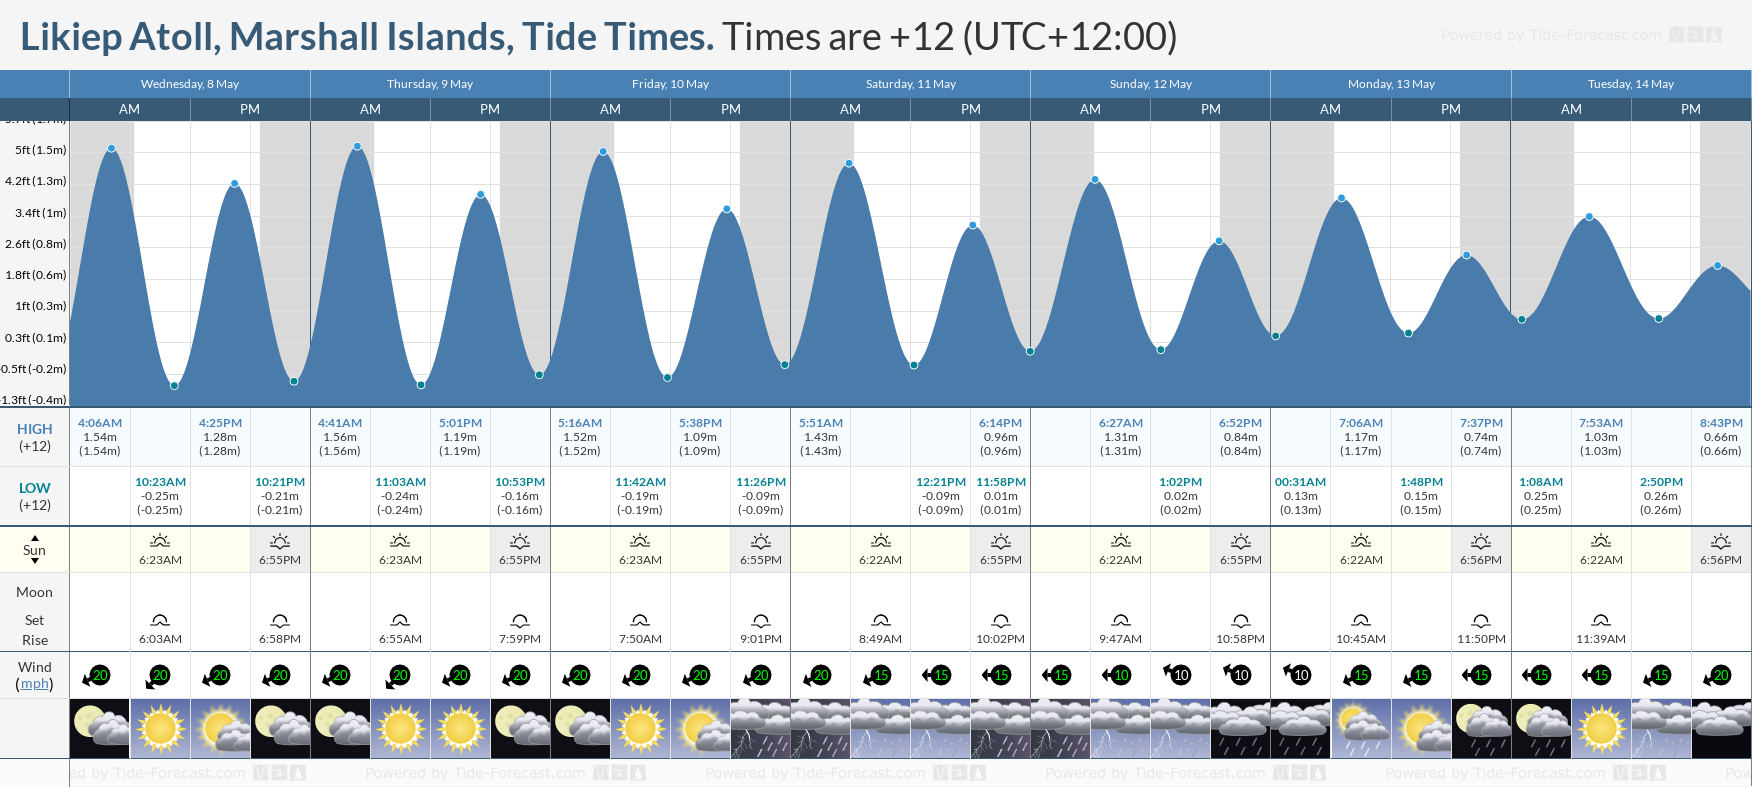 Likiep Atoll, Marshall Islands Tide Chart including high and low tide tide times for the next 7 days